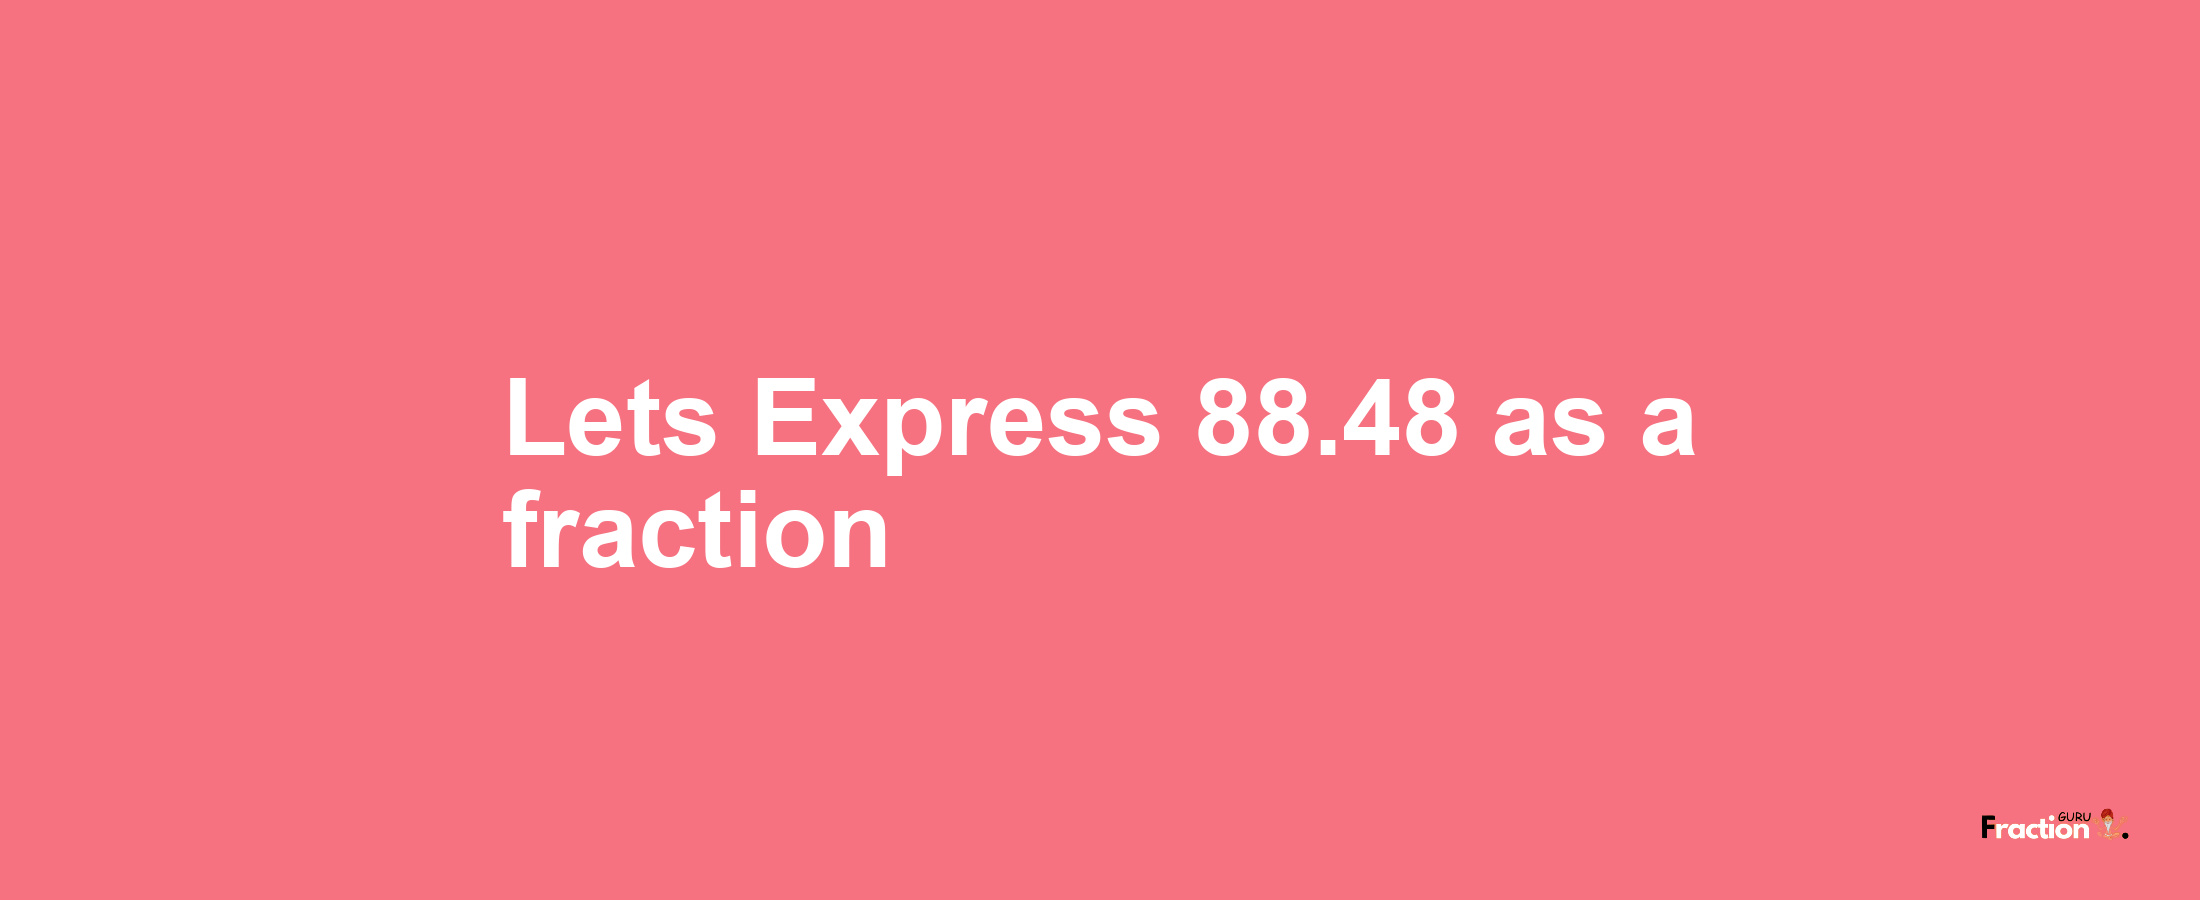 Lets Express 88.48 as afraction